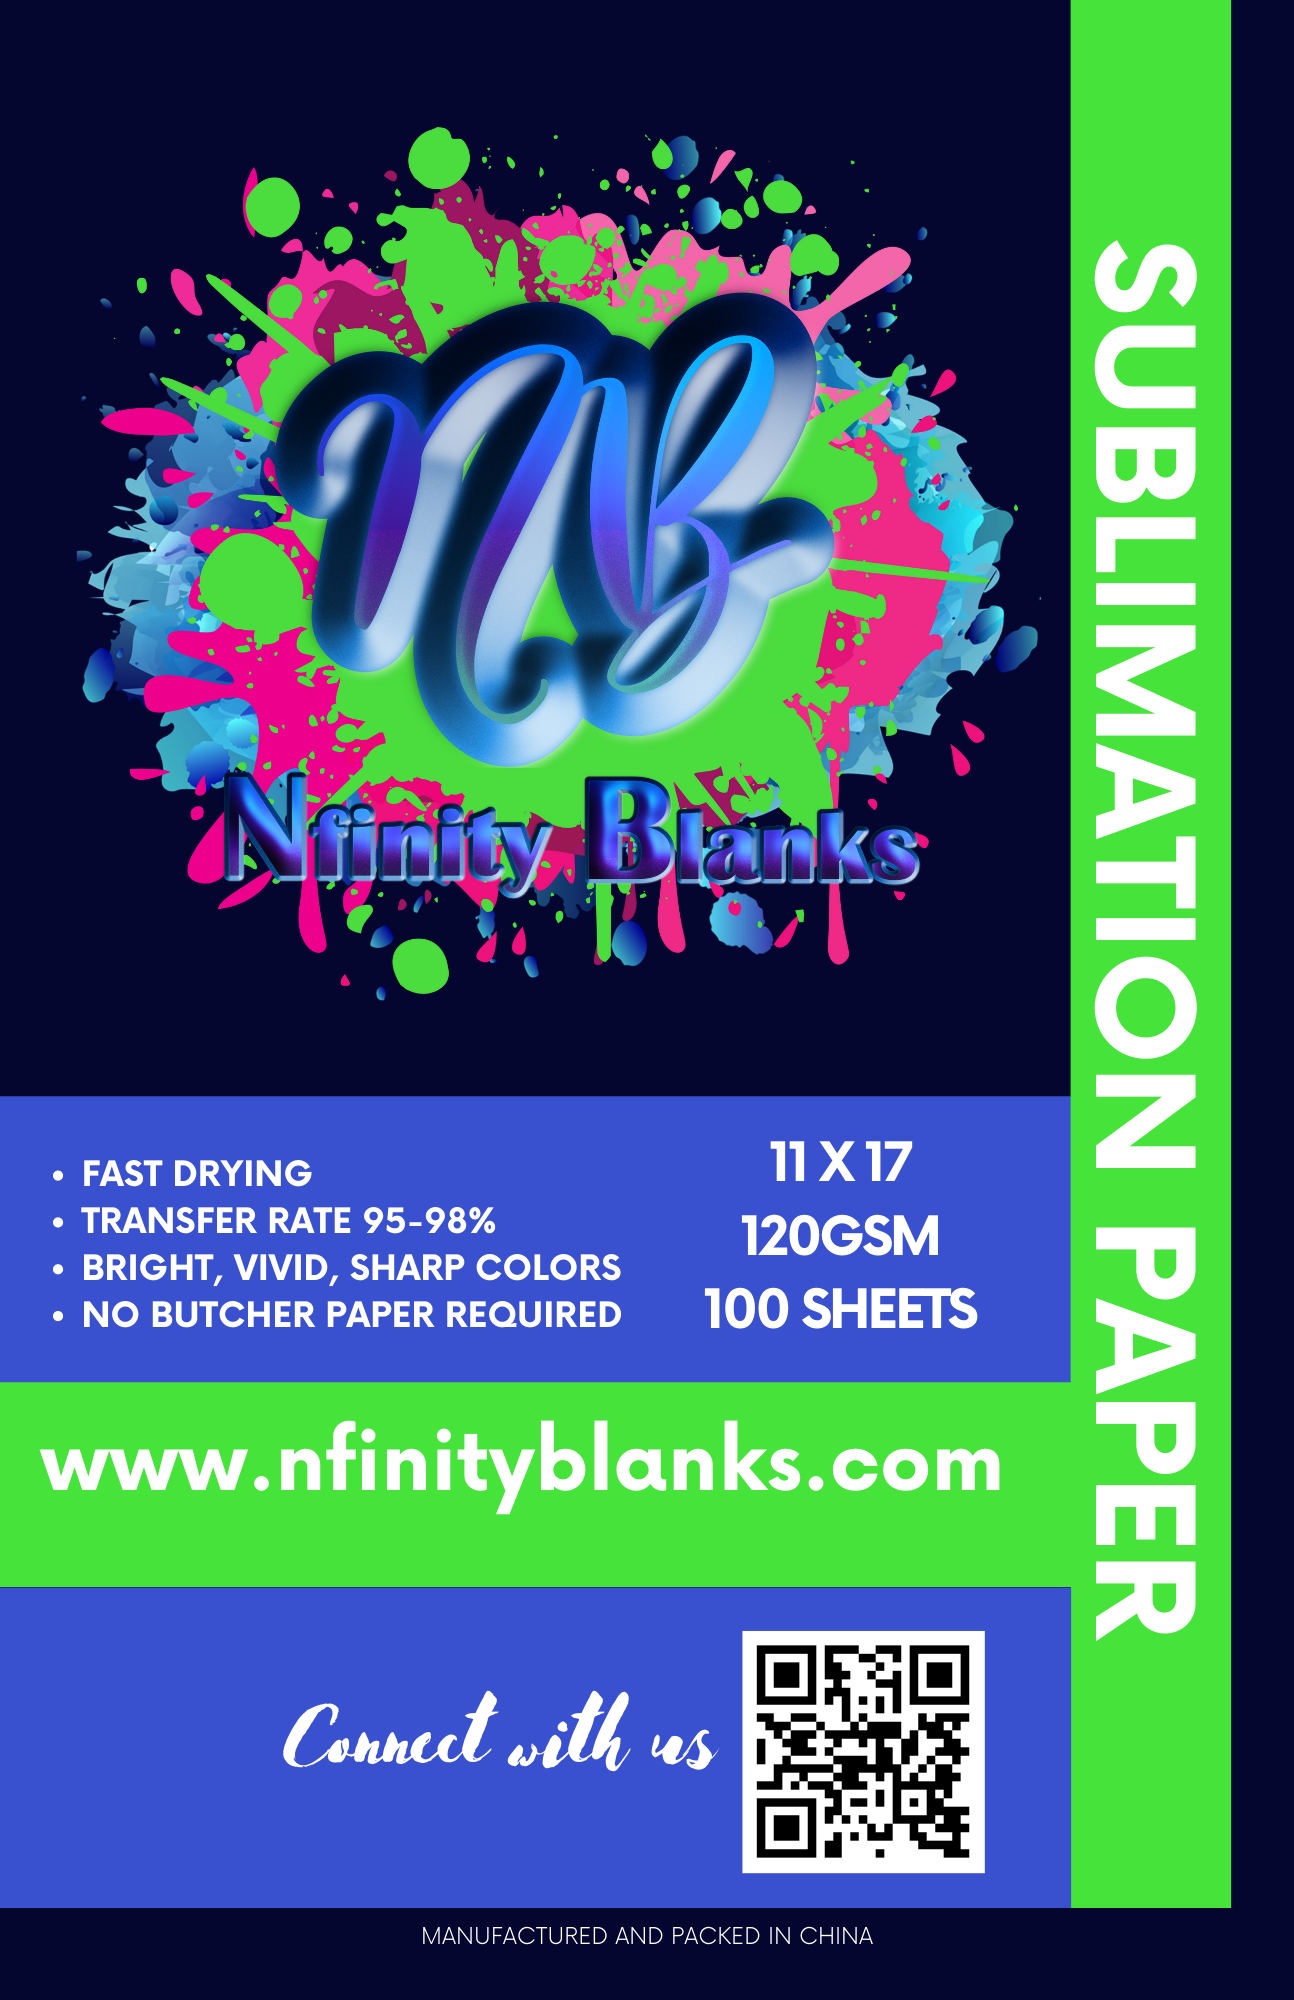 Case of Sublimation Paper – Nfinity Blanks